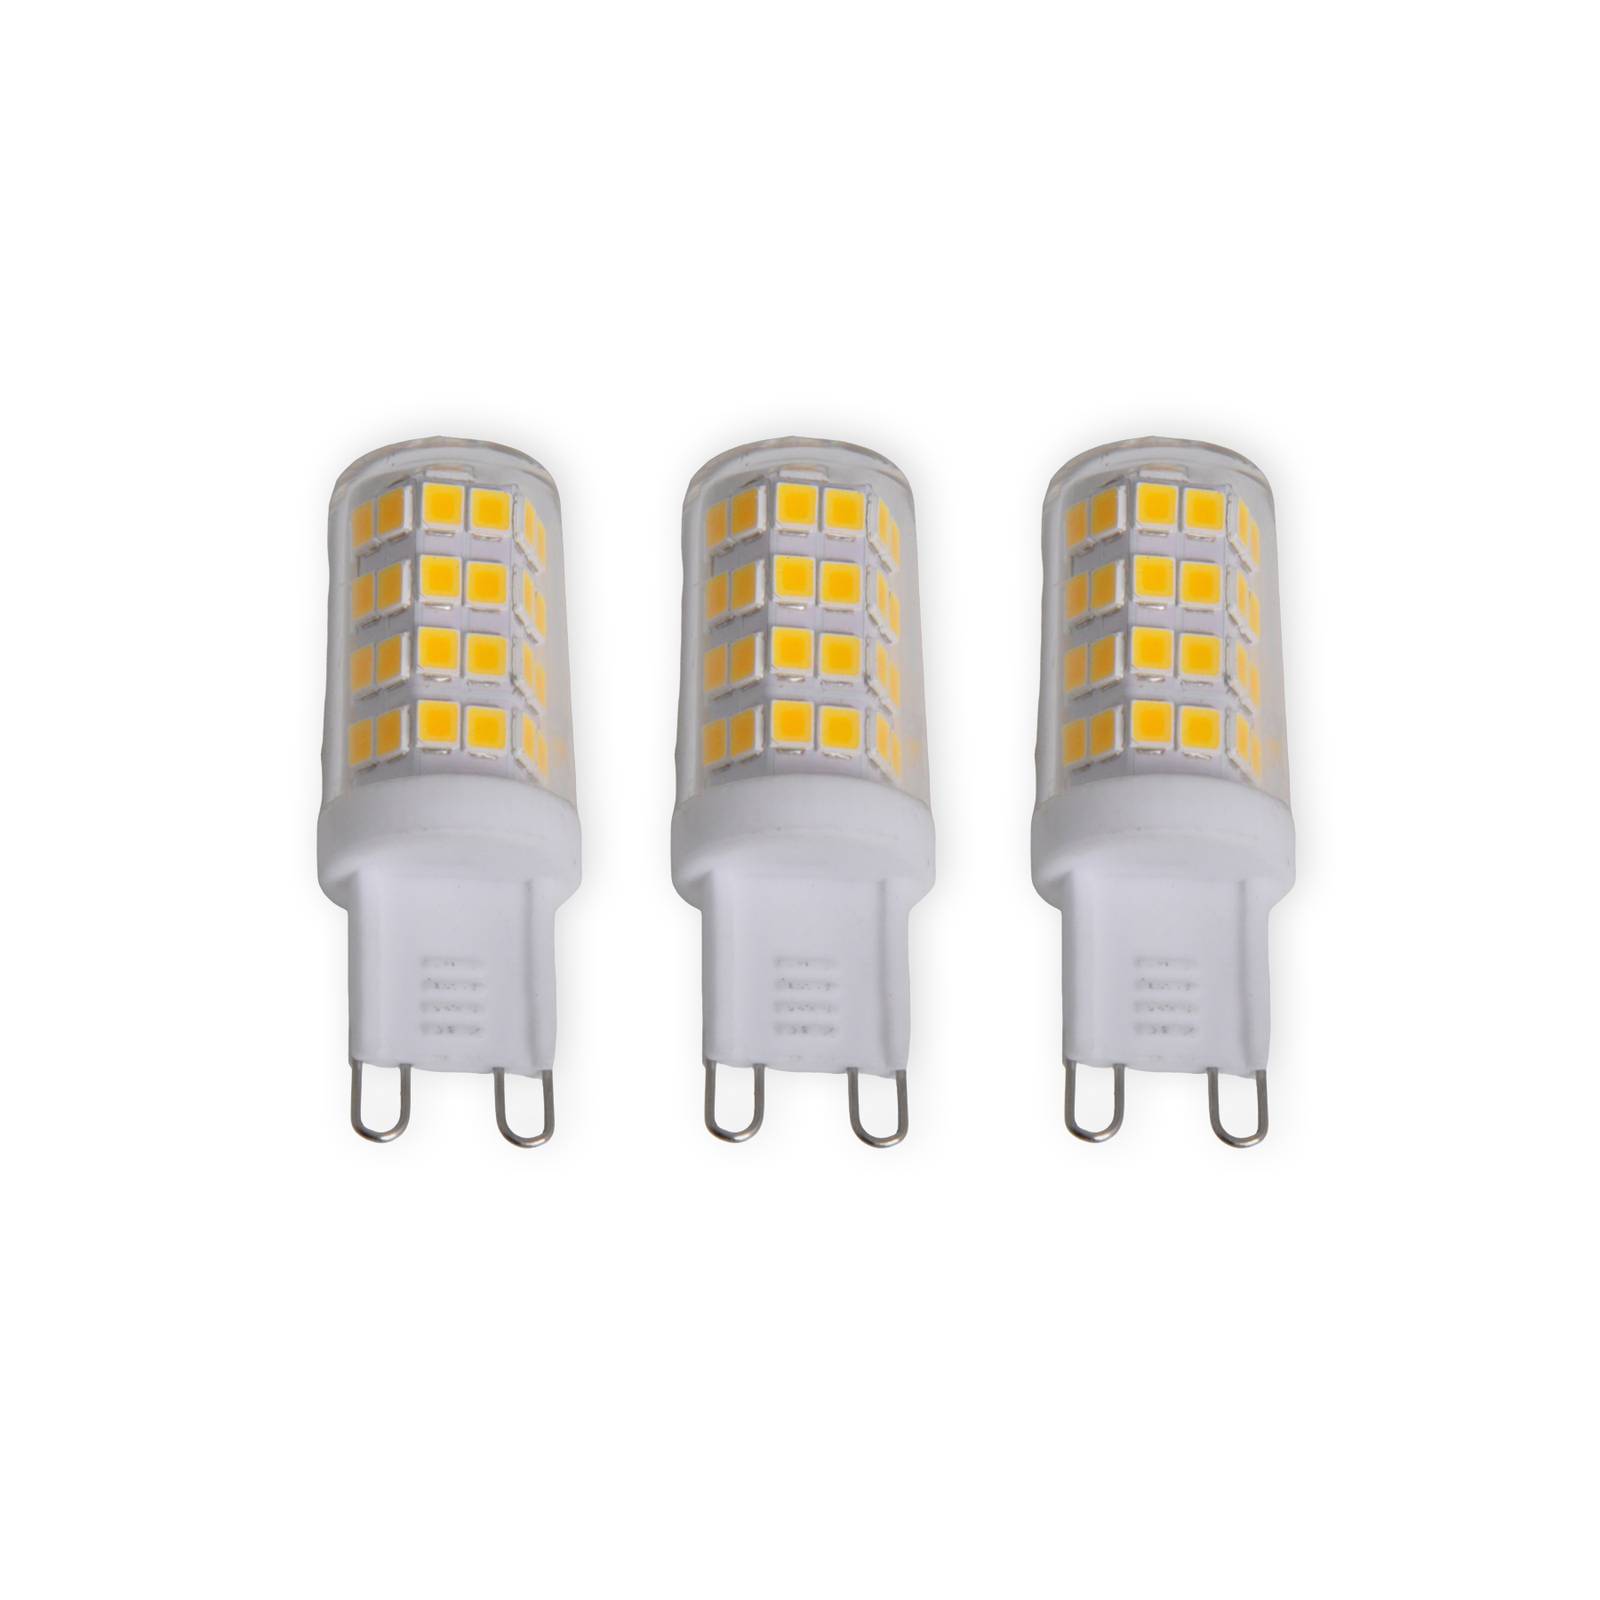 Image of Ampoule broches LED G9 3 W blanc chaud 330 lm x3 